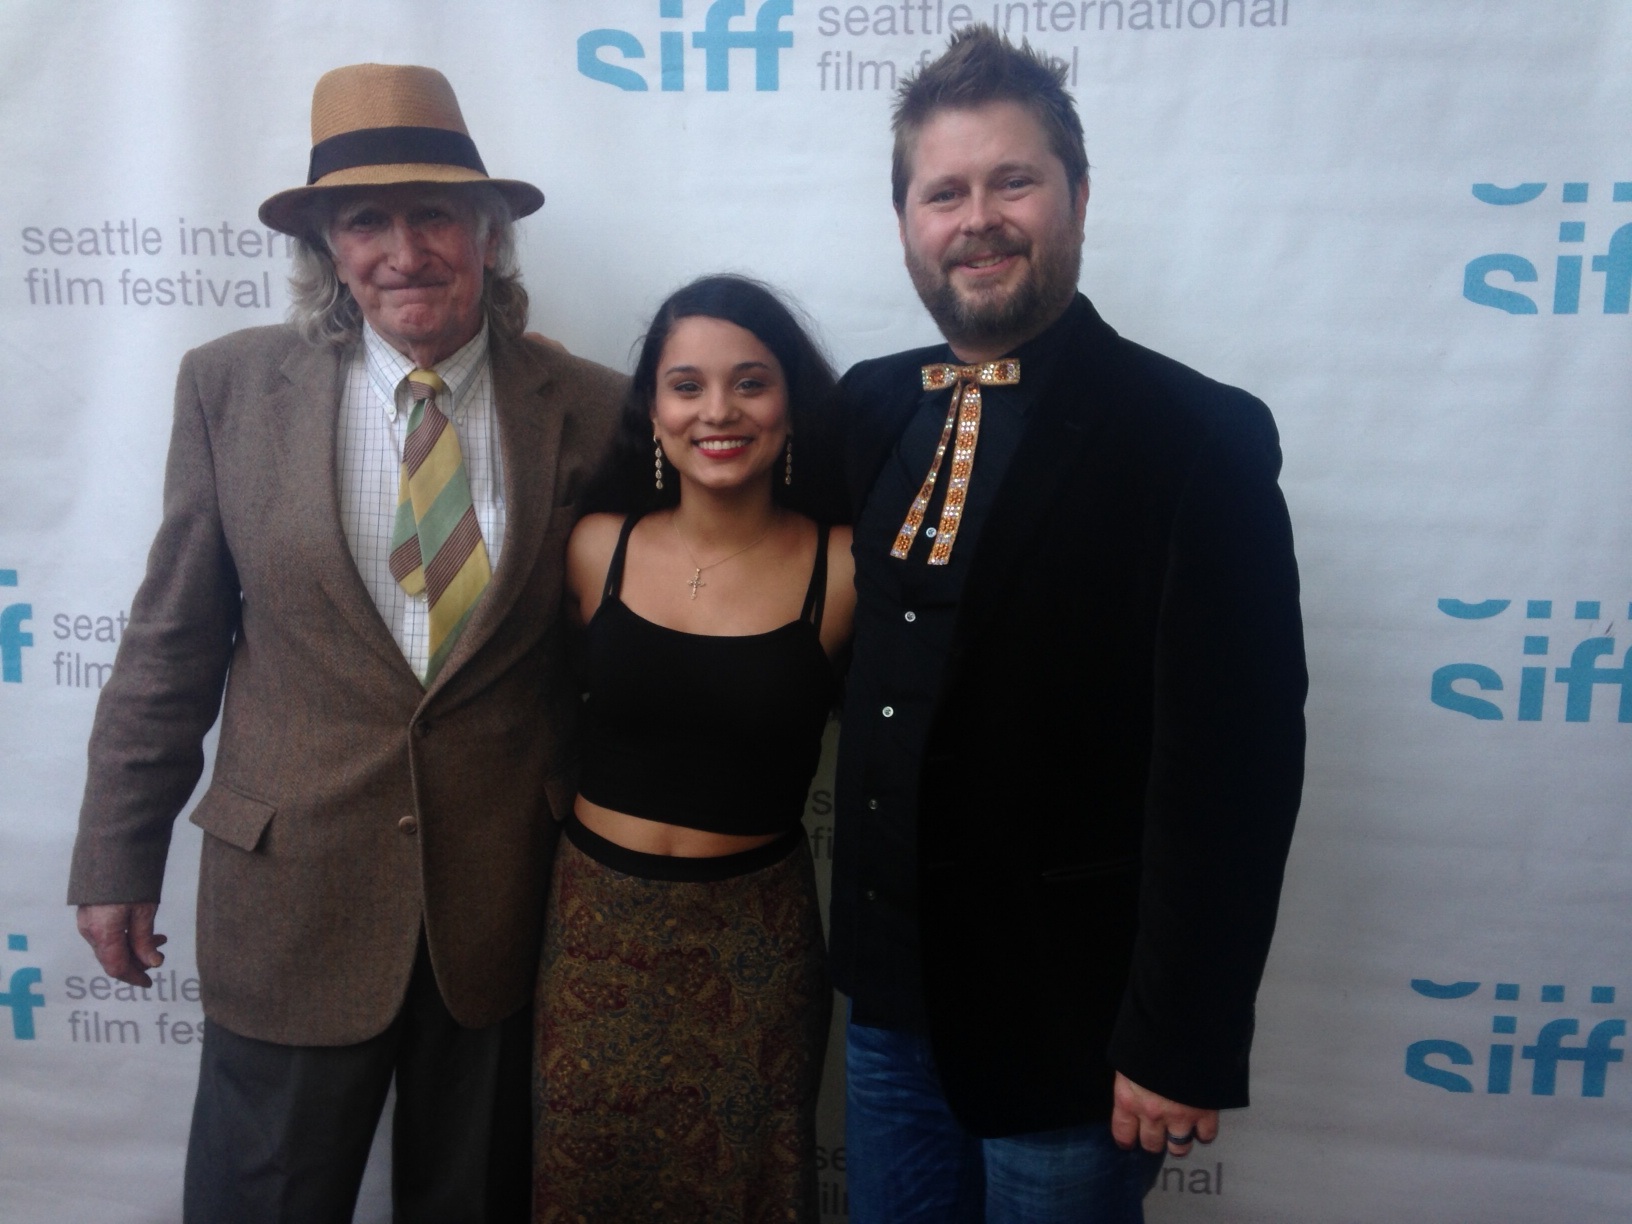 BFE Actors Wally Dalton, Kelsey Packwood and Director Shawn Telford at the 2014 Seattle International Film Festival.